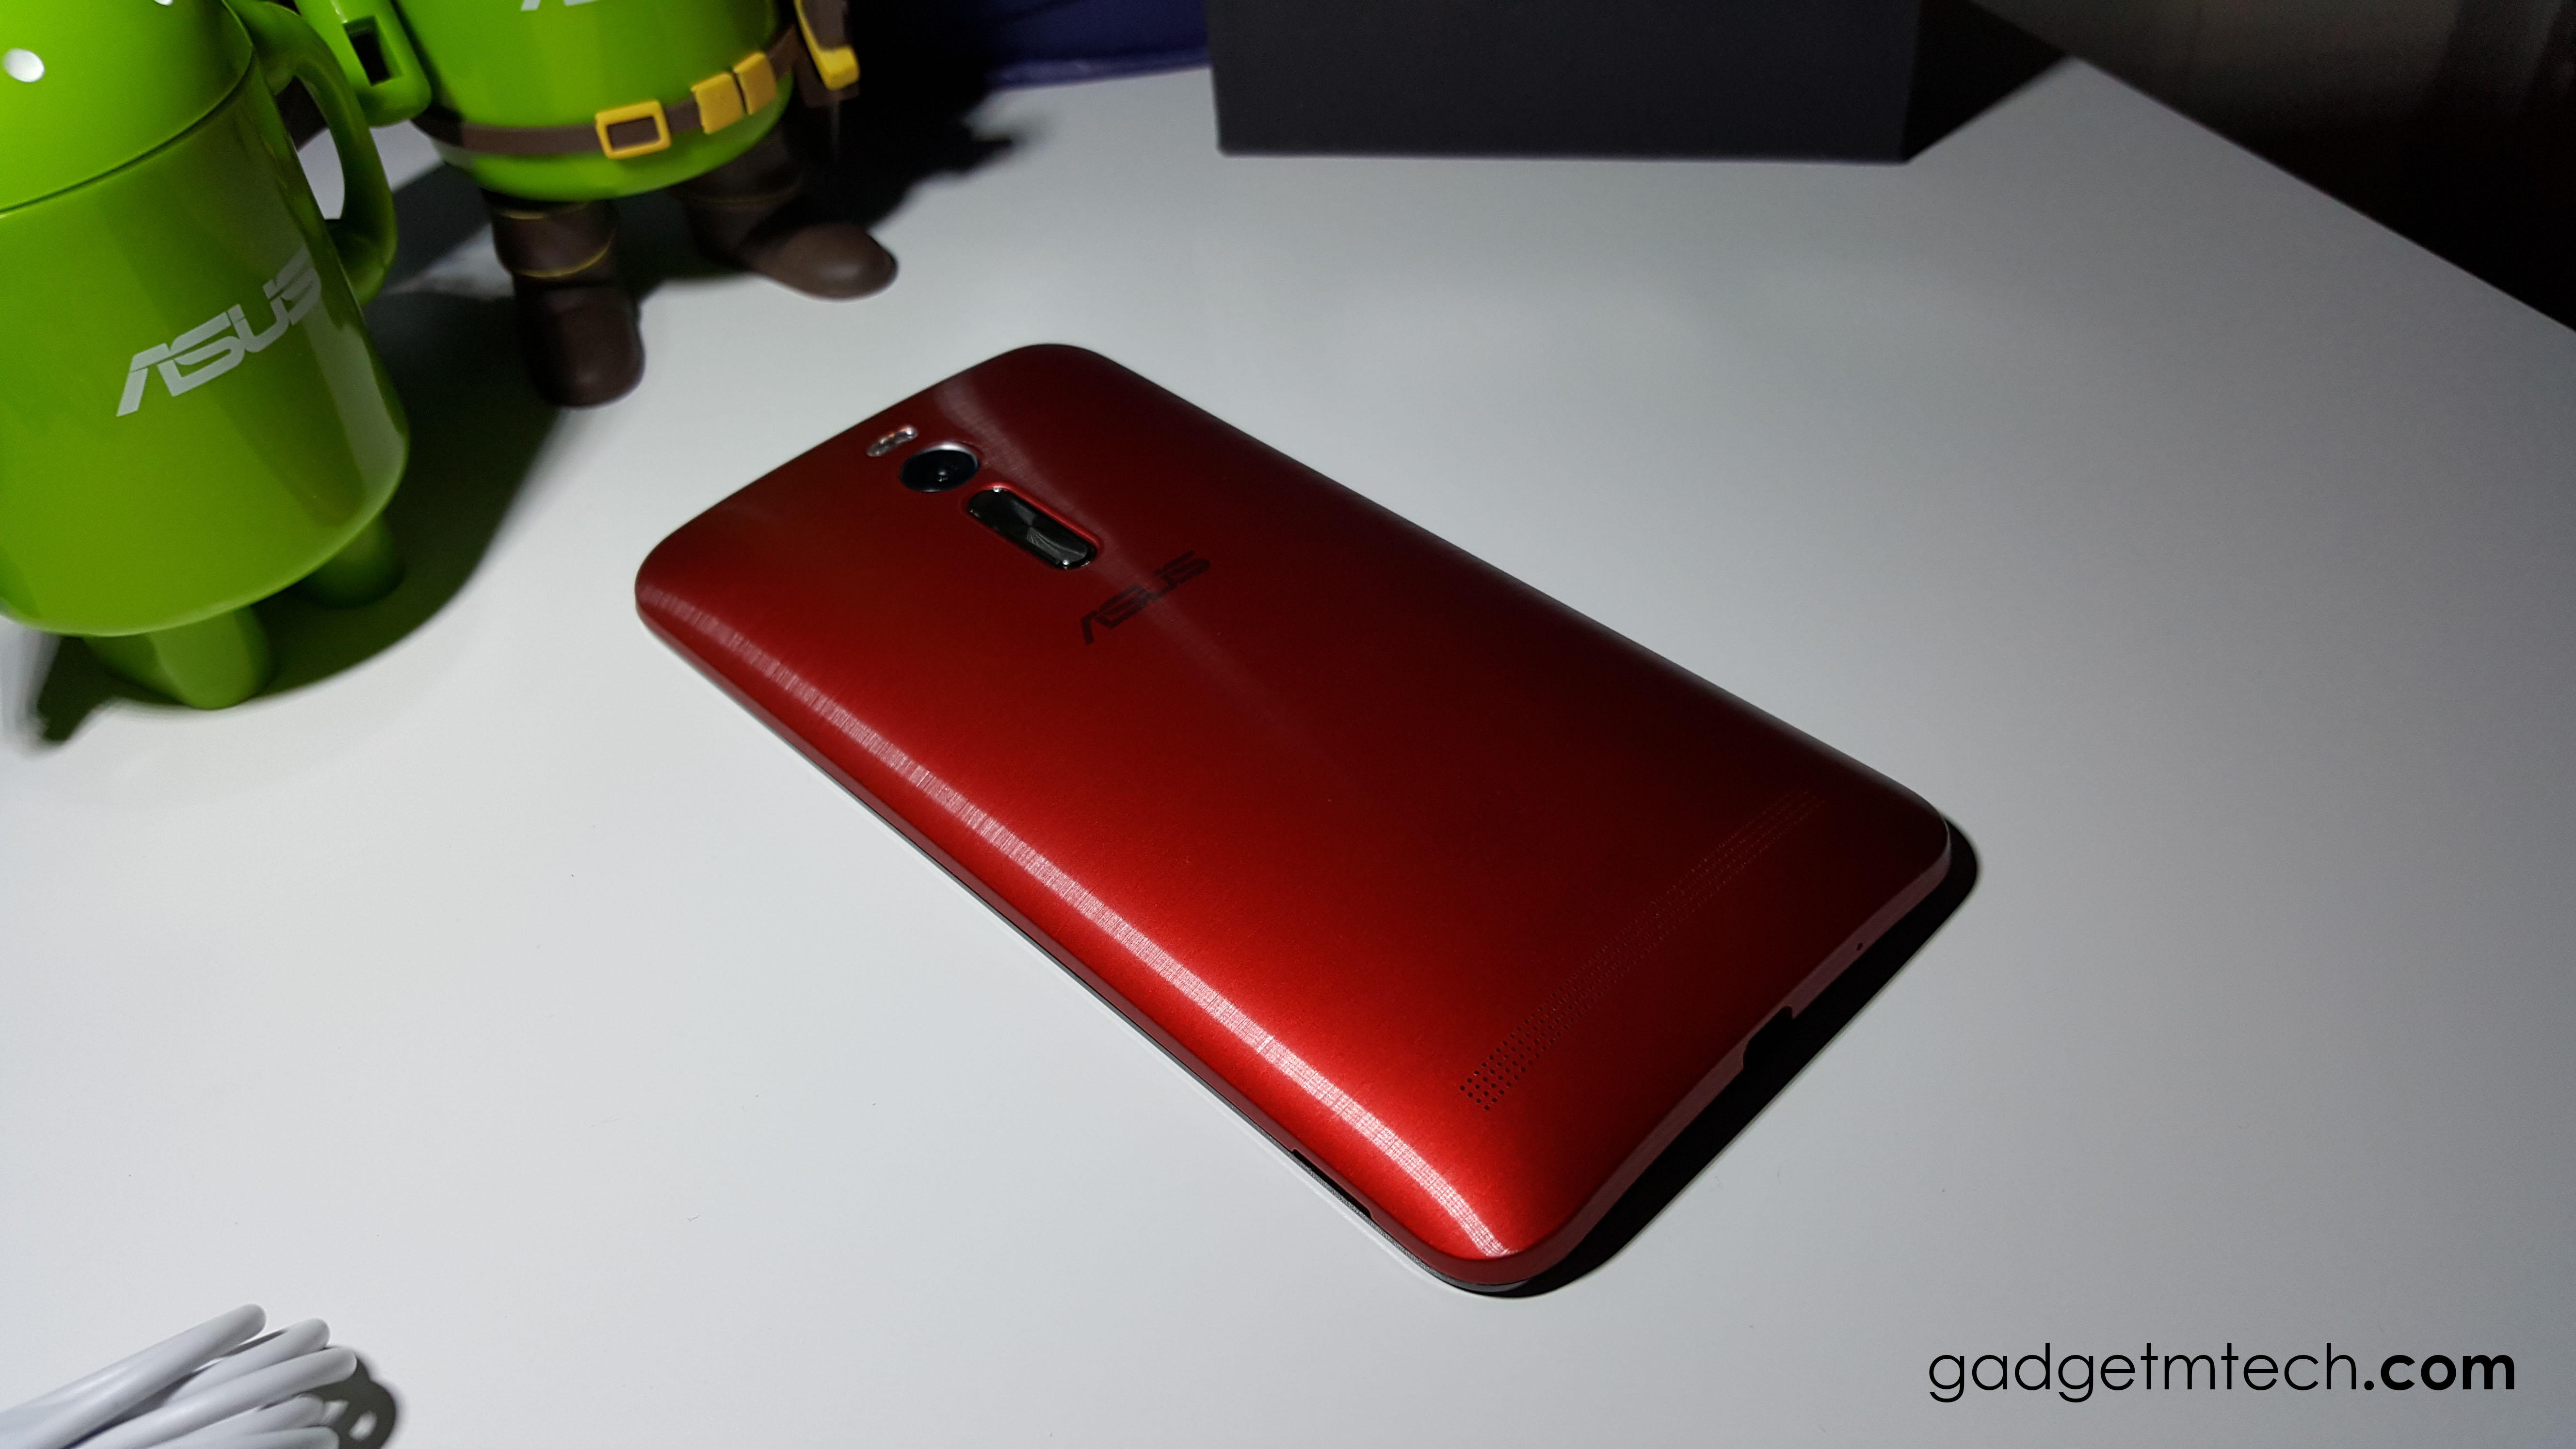 5 Things to know about the ASUS ZenFone 2